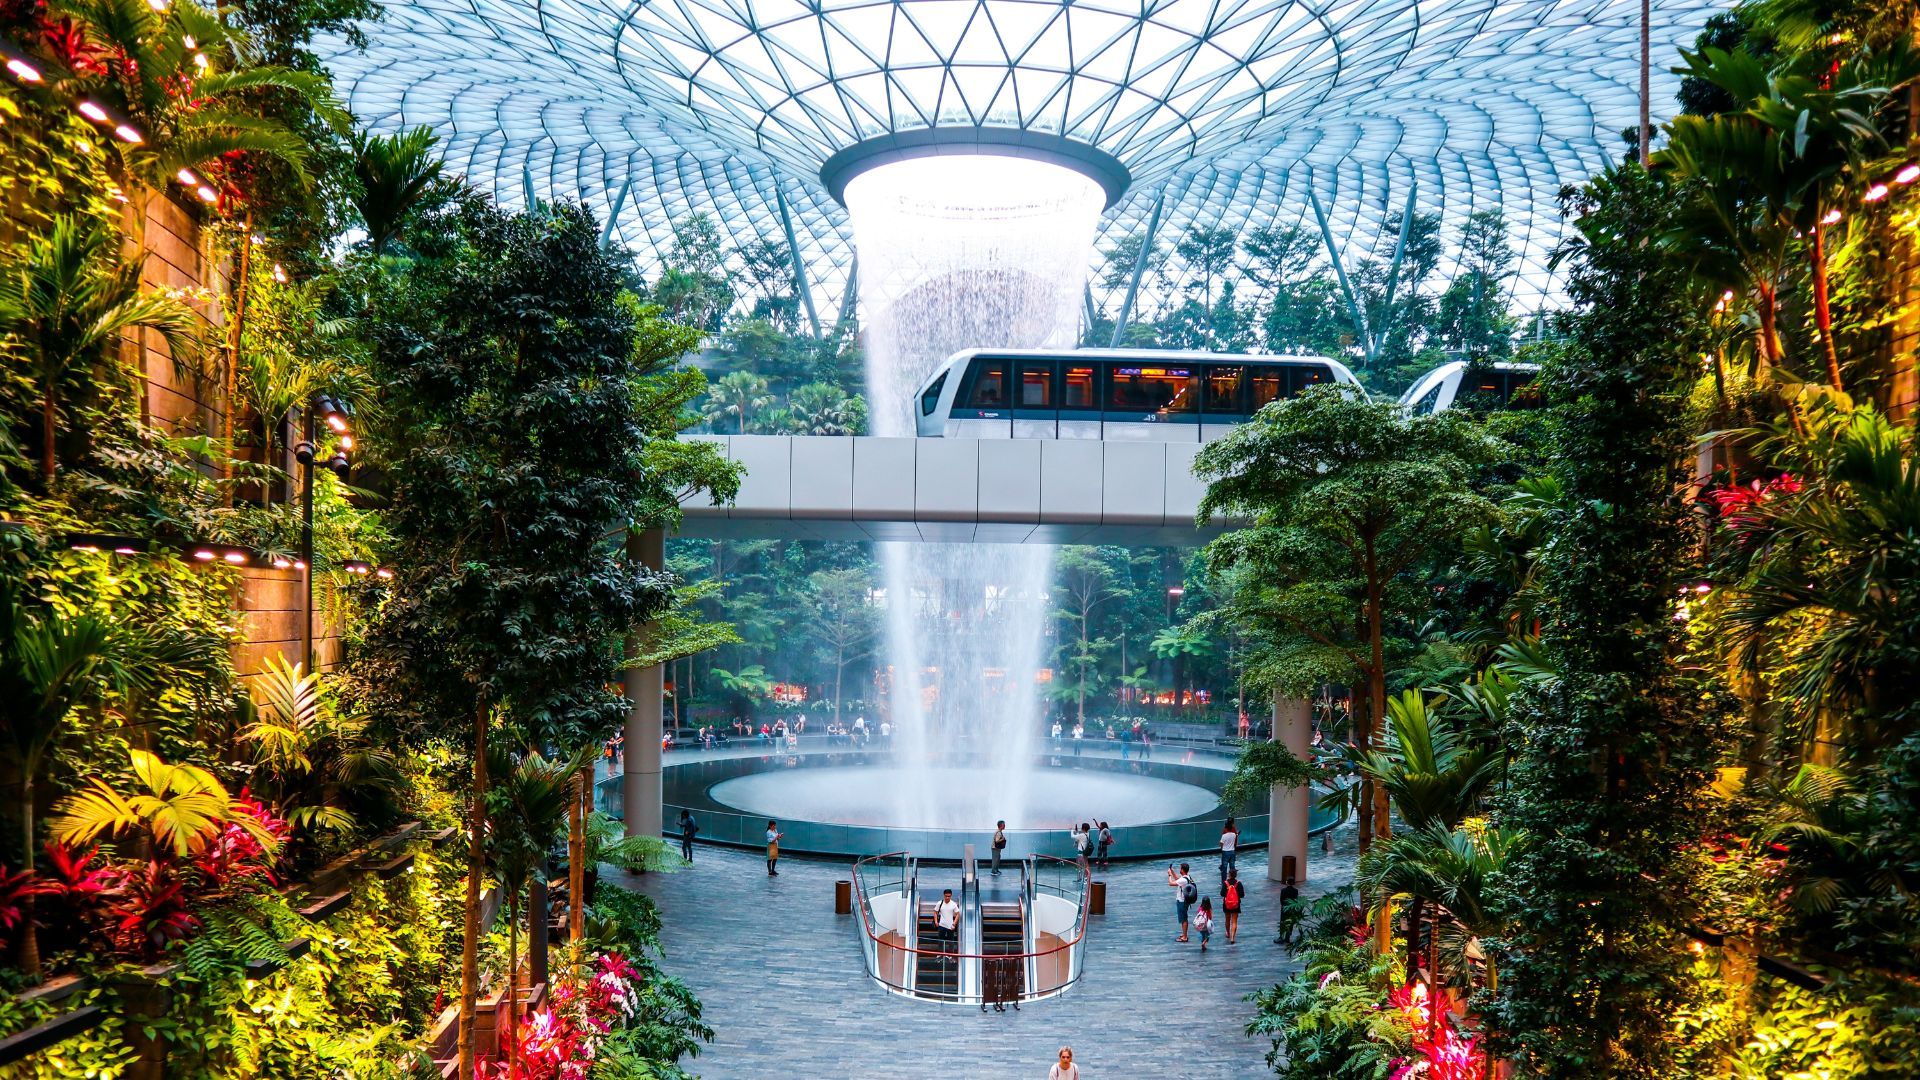 Singapore Changi Airport (SIN) (@changiairport) • Instagram photos and  videos